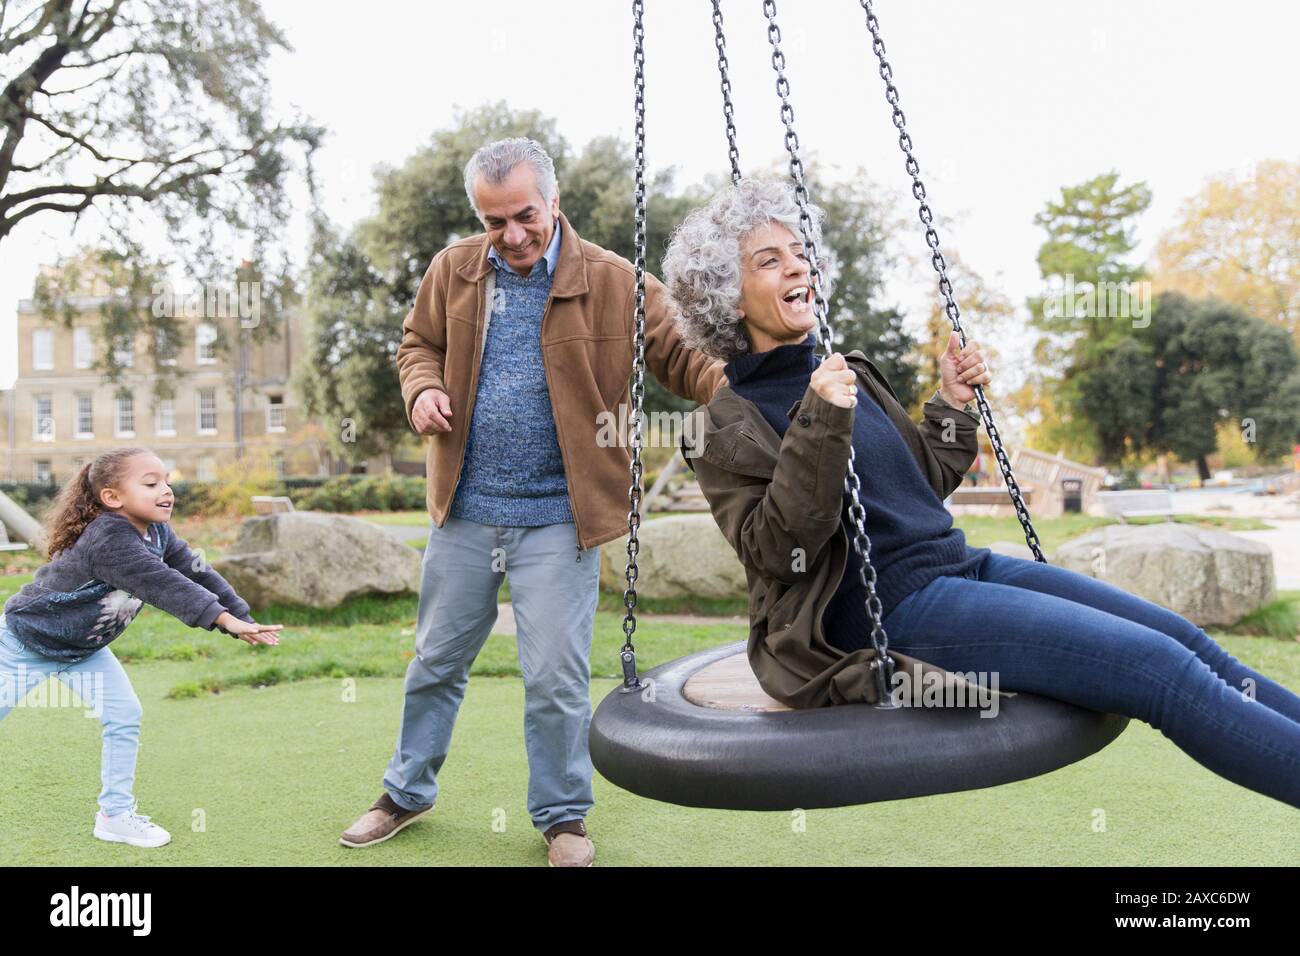 Playful grandparents and granddaughter playing on swing in park Stock Photo